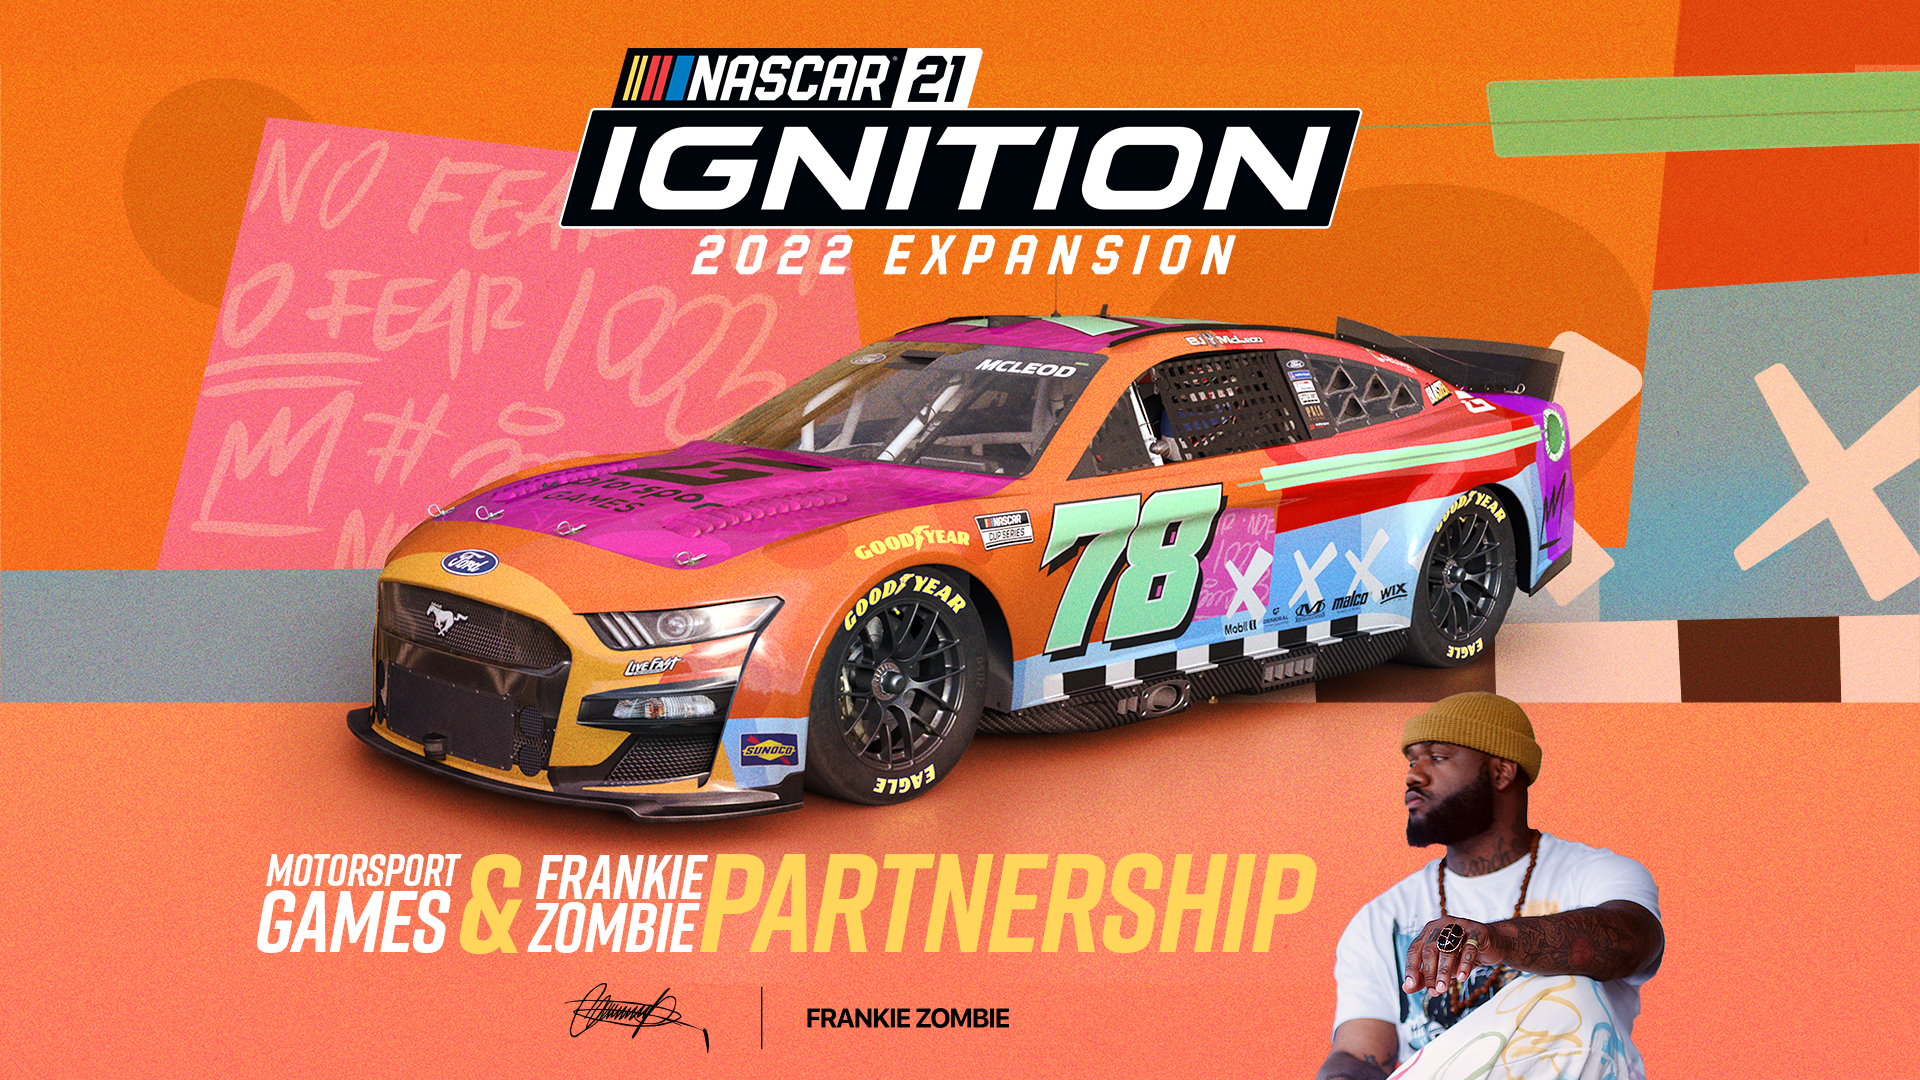 MOTORSPORT GAMES AND FRANKIE ZOMBIE ANNOUNCE PARTNERSHIP TO EXPAND AUDIENCE OFFERINGS WITH UPCOMING ARTISTIC AND PHILANTHROPIC ACTIVATIONS